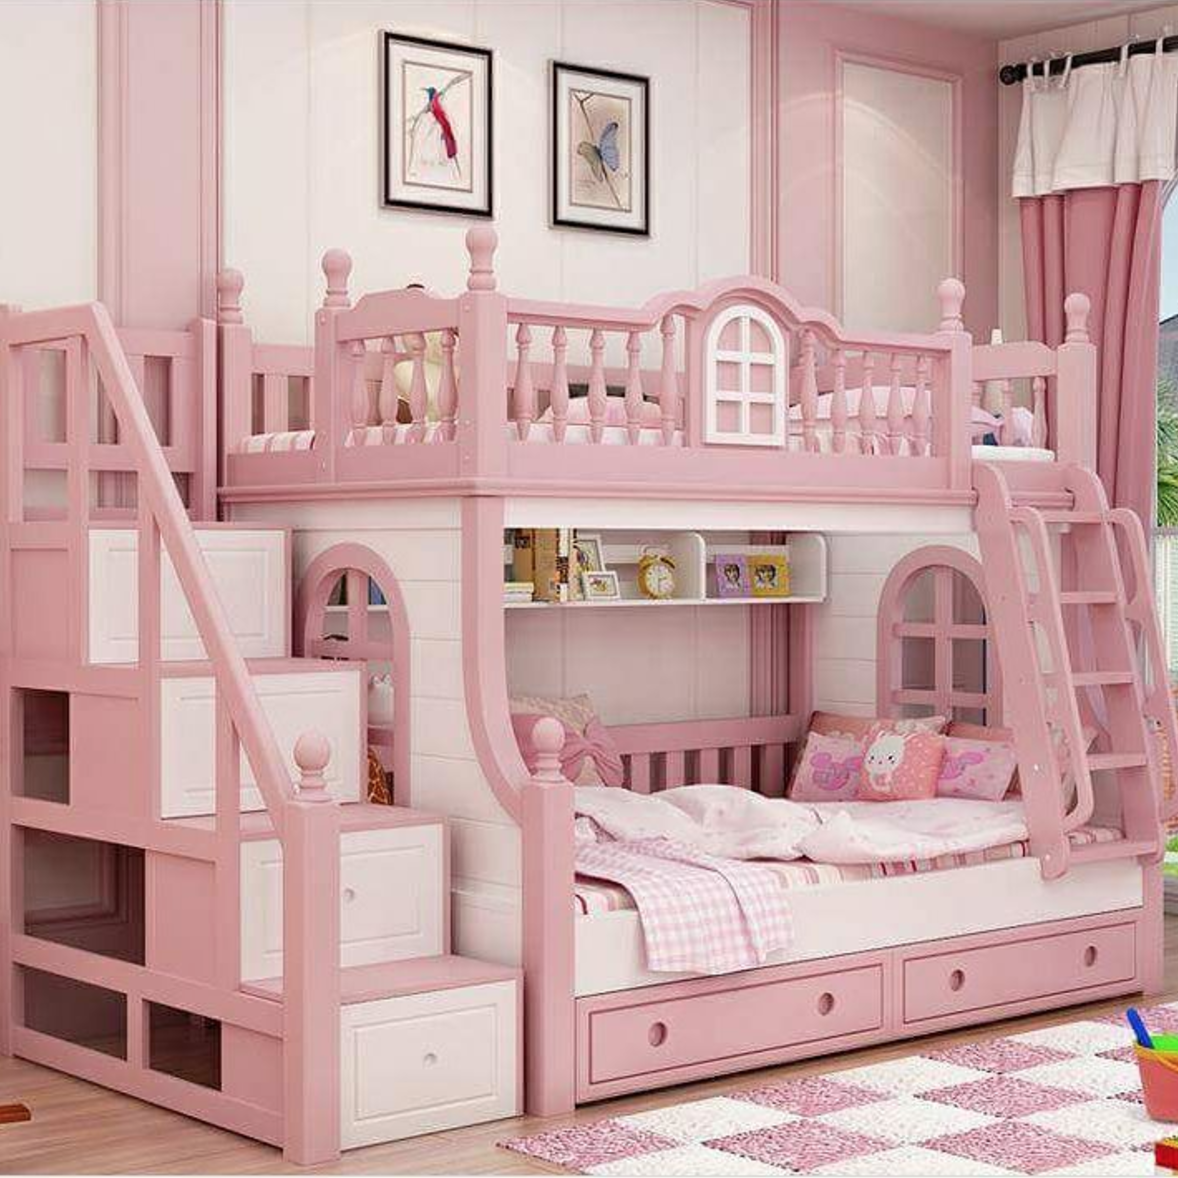 Bunk Bed with Fairytale Theme